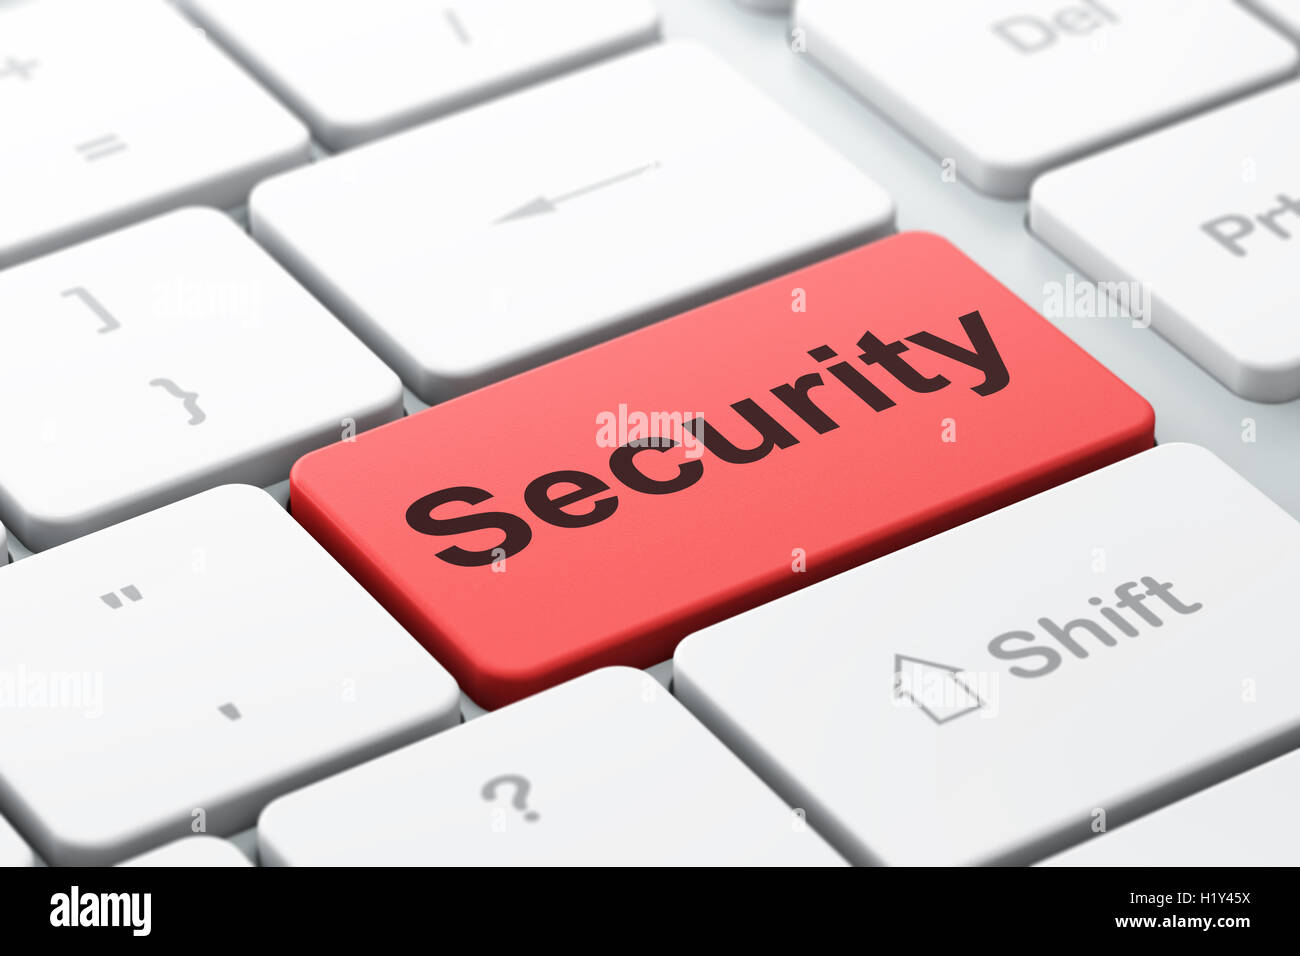 Safety concept: Security on computer keyboard background Stock Photo